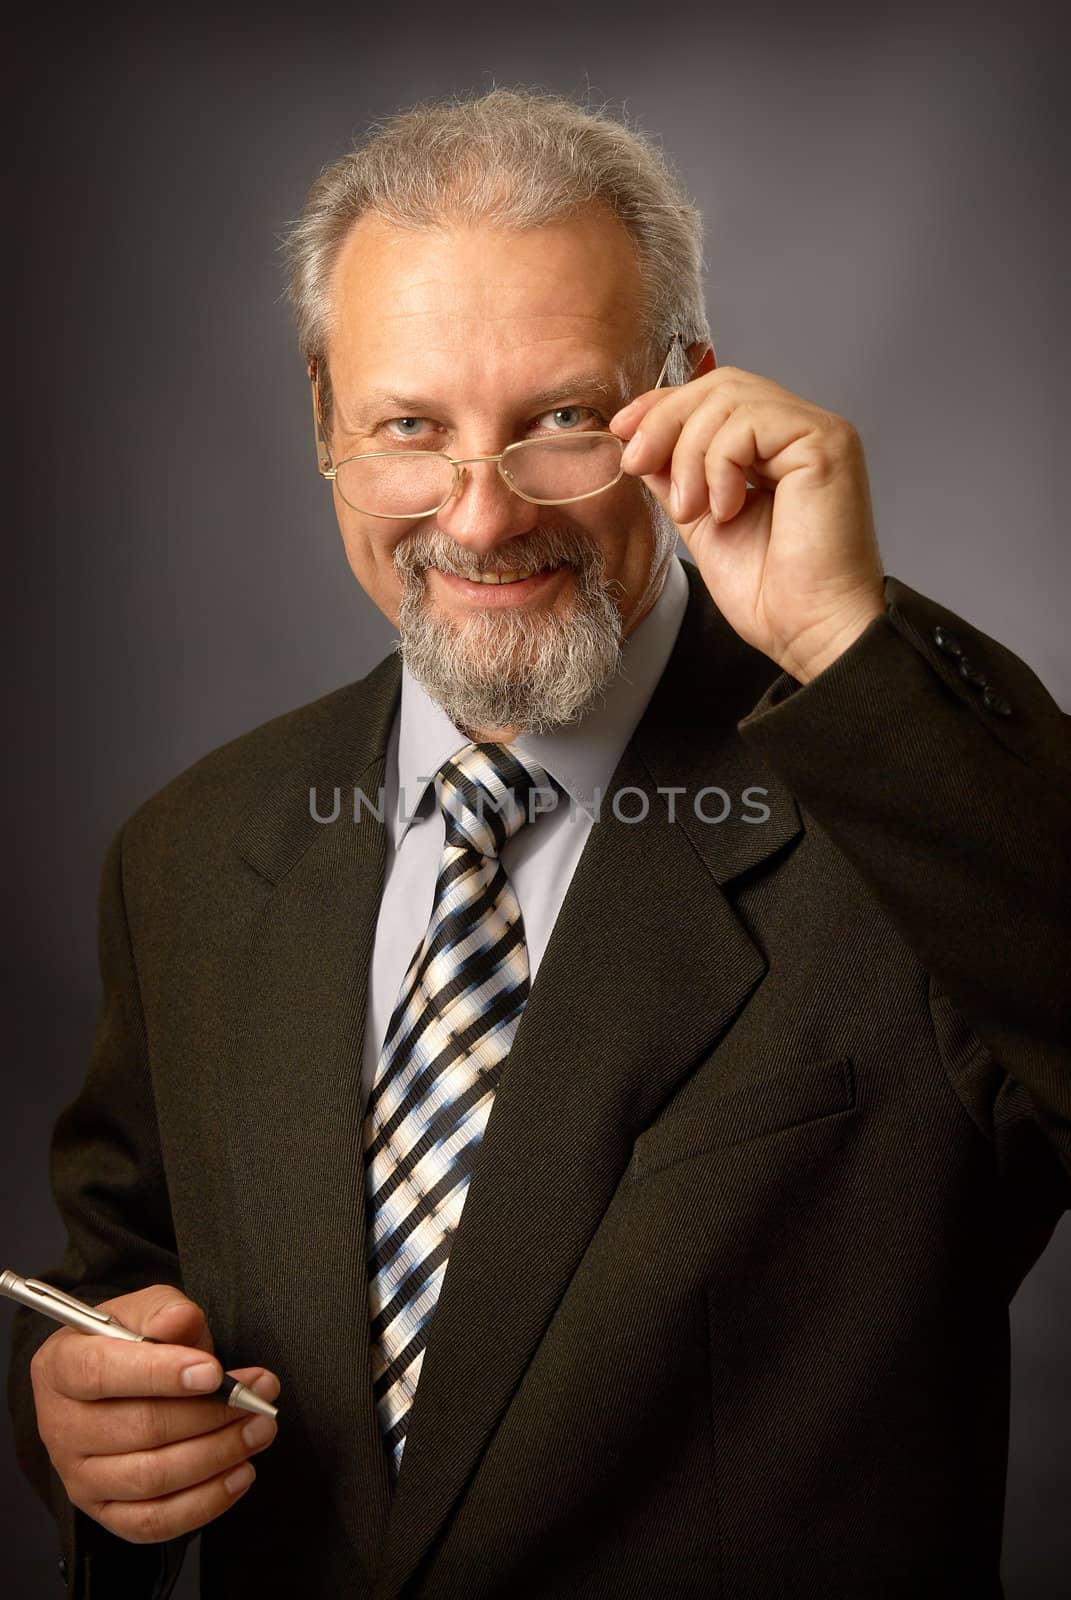 Medicine specialist (psychologist, teacher or doctor) on black background with glasses and pen in his hand